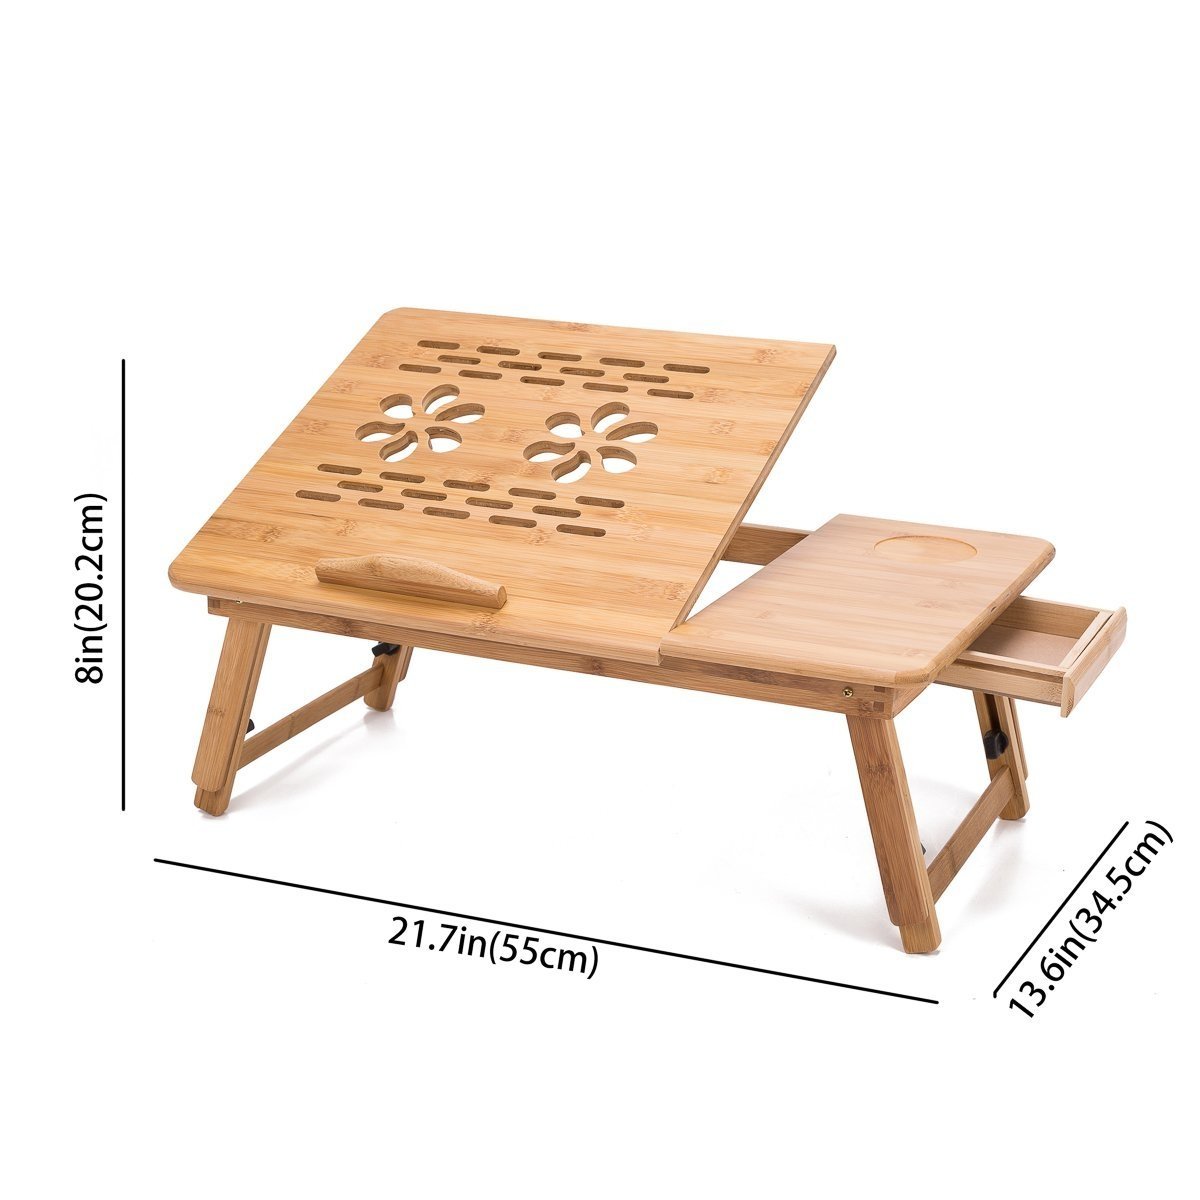 THY COLLECTIBLES Multi Function Bamboo Lapdesk Table Laptop Stand Breakfast Trays Bed Serving Tray with Adjustable Legs - image 5 of 9